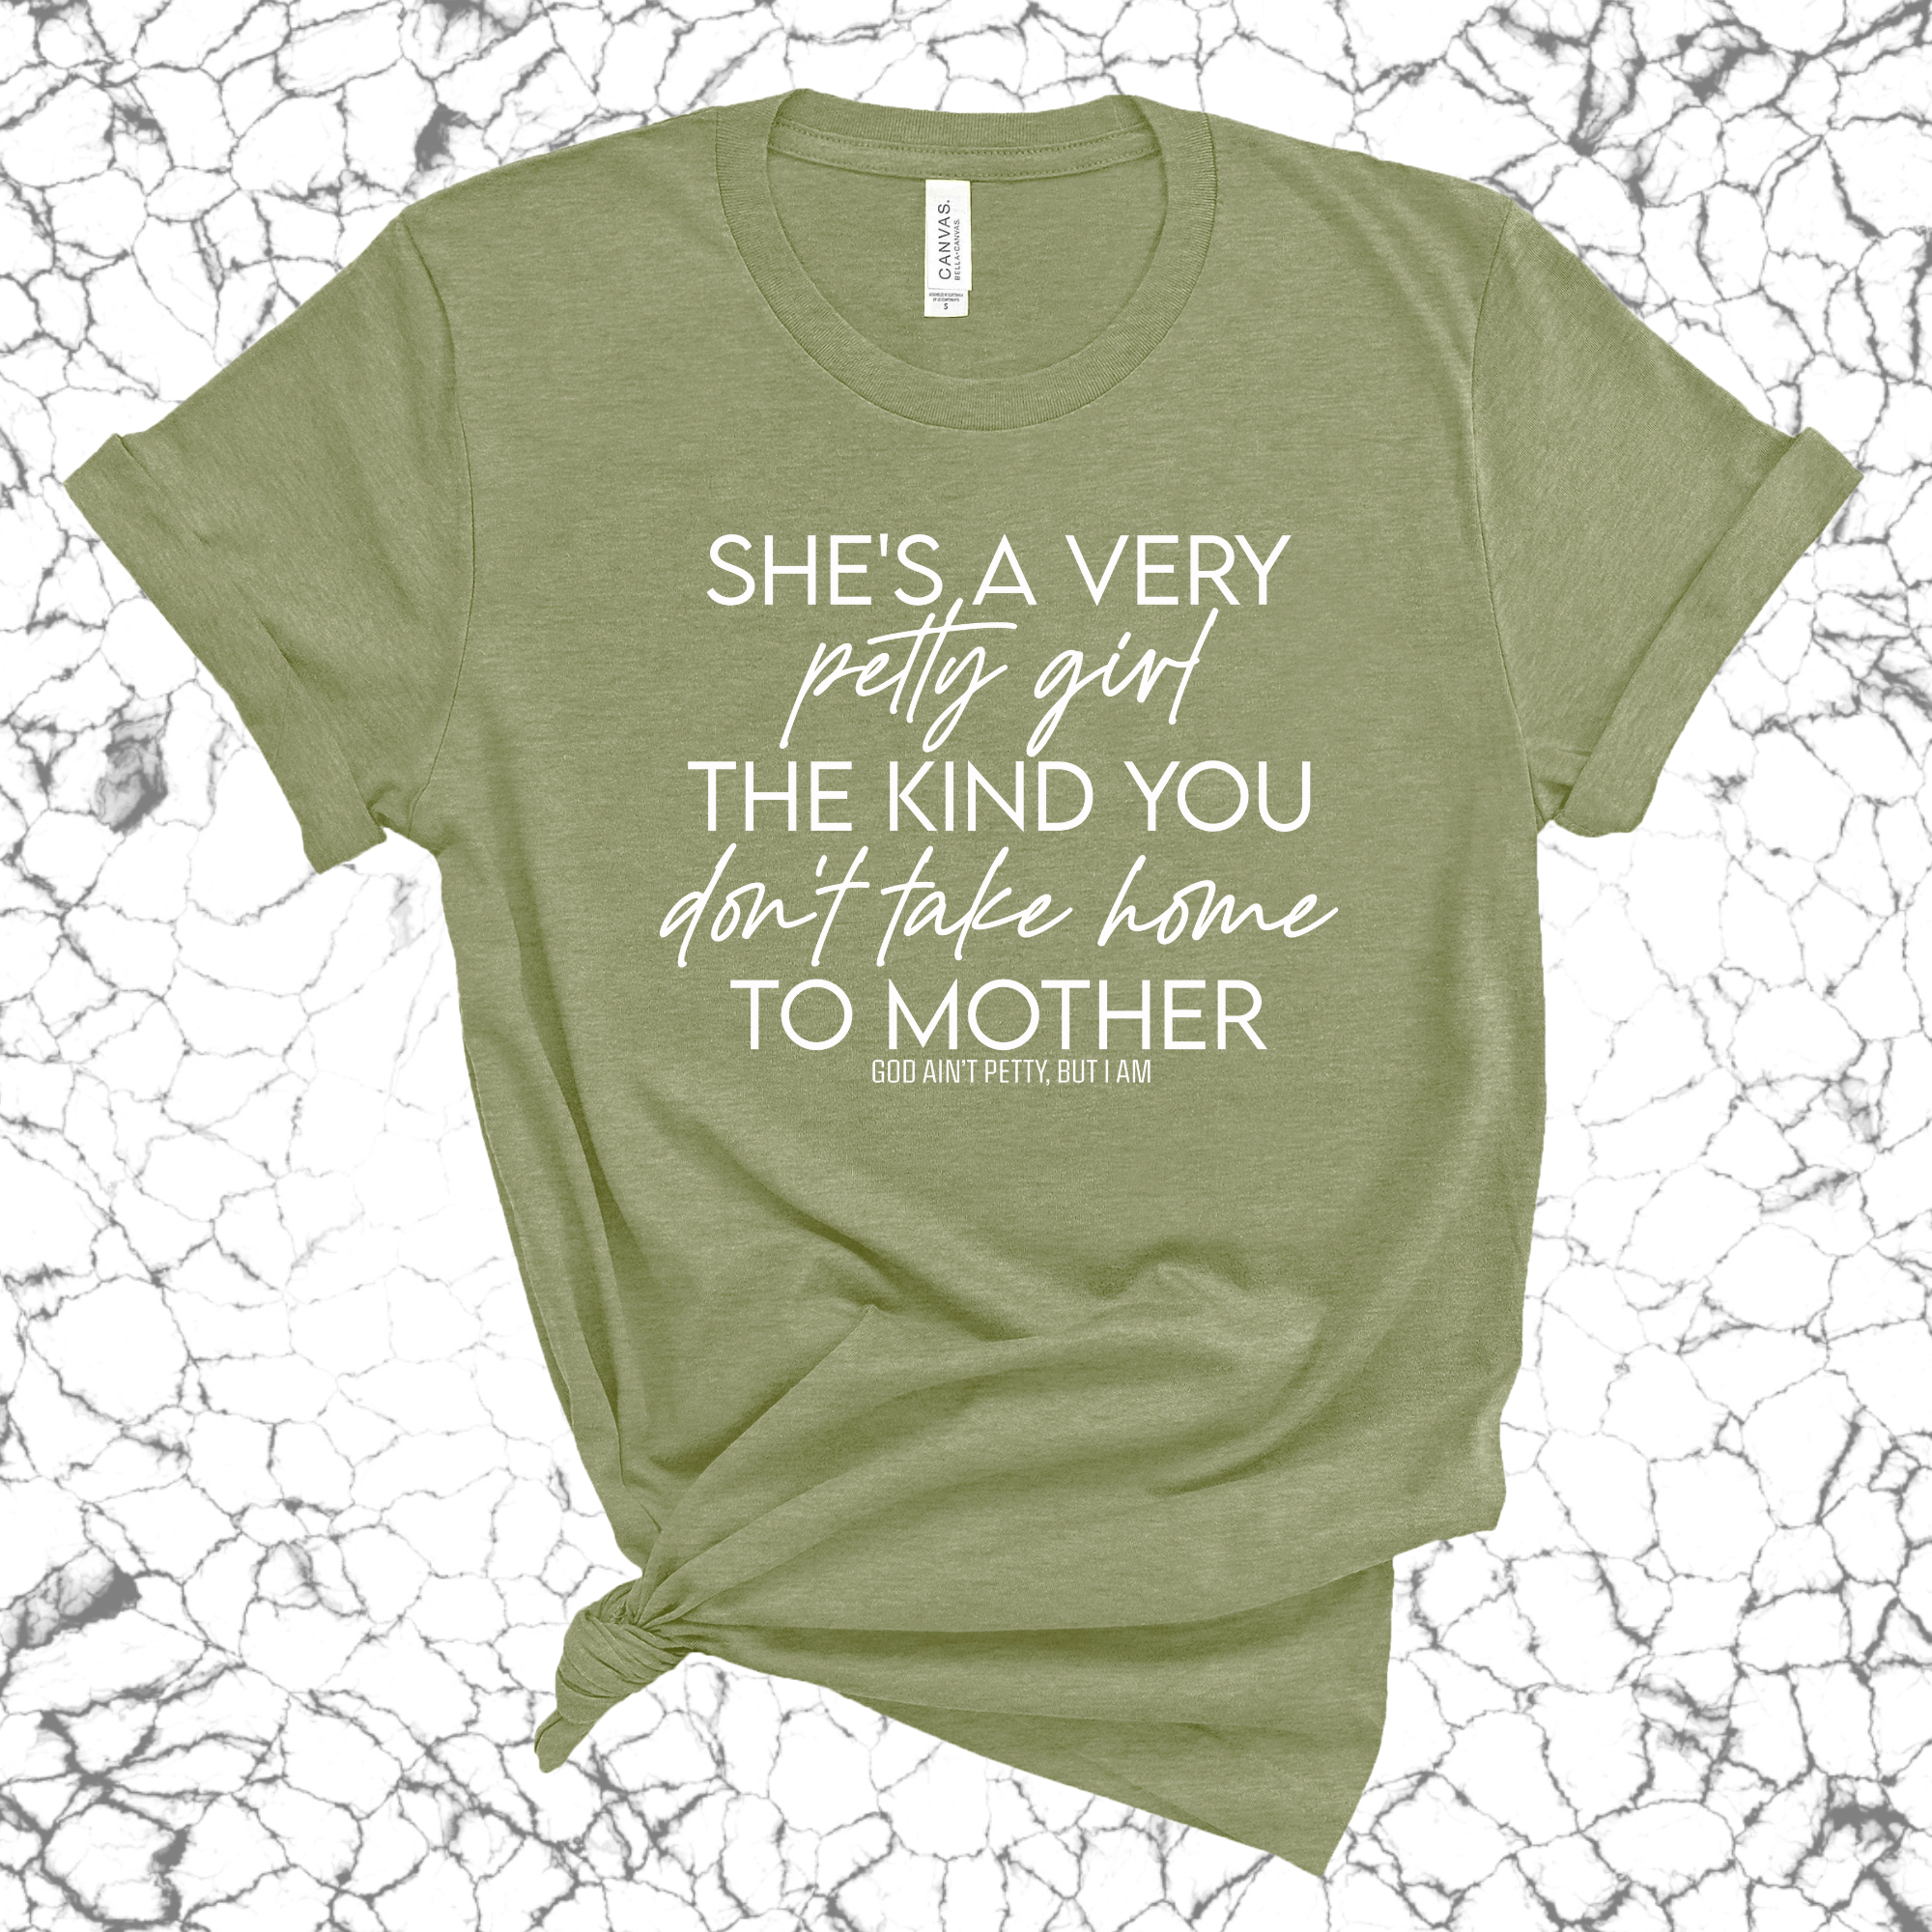 She's a very petty girl the kind you don't take home to mother Unisex Tee-T-Shirt-The Original God Ain't Petty But I Am